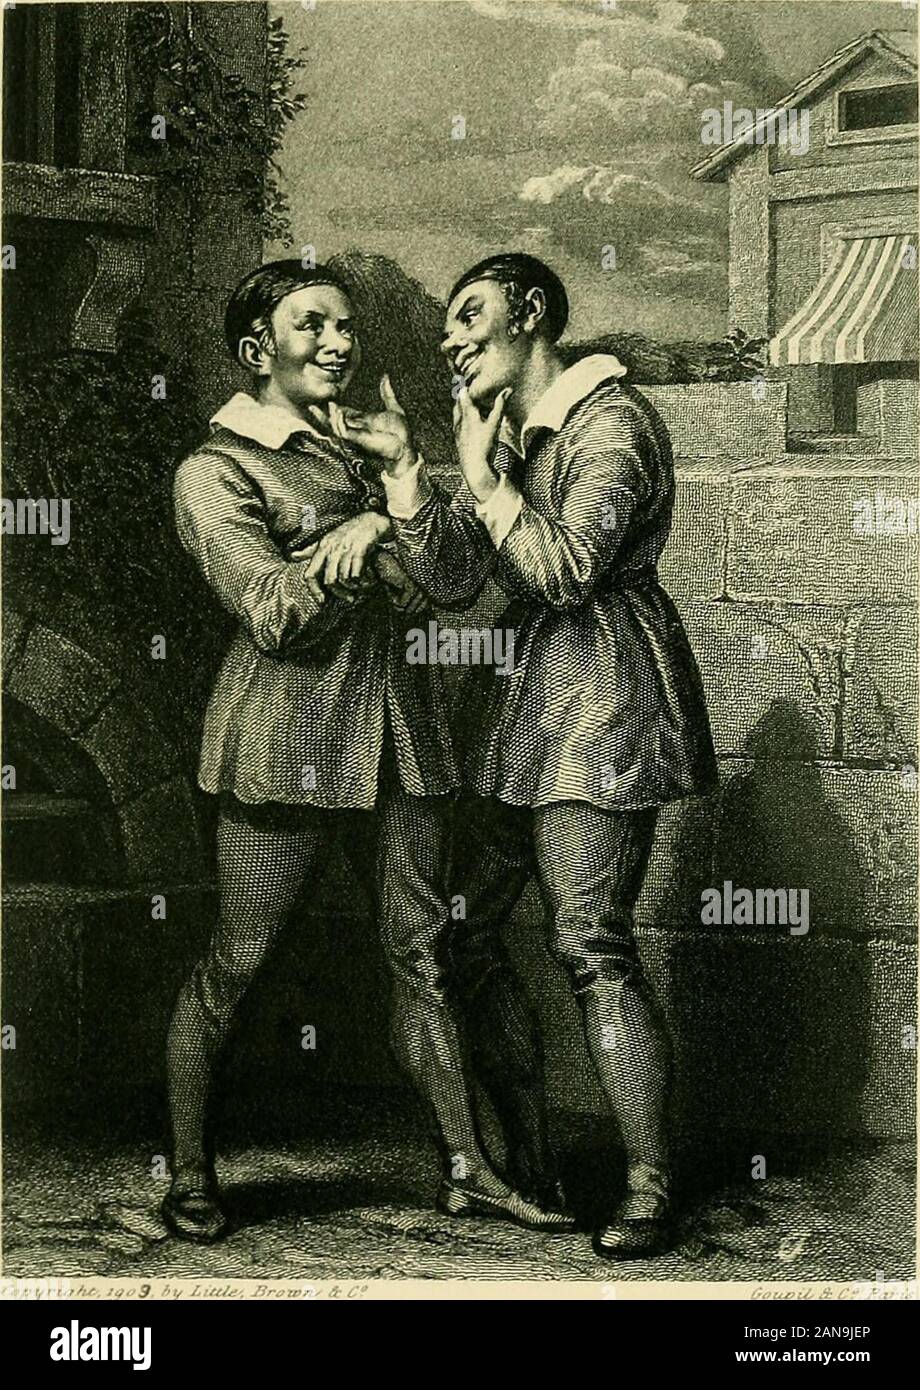 Gallery of Shakespeare illustrations, from celebrated works of art . upU S^C.rarui THE TWO DROMIOS From an engraving by J. Bauer, after the painting byRichter The Ojmedy of Errors, Act V, Sc. i NT .THT. fvpyrtj^hCf. i^oS, ^y Luti^, JSrfftVTi^ /t C? OoupU A /?-, Pari BEATRICE AND BENEDICK From the painting by H. Merle Much Ado About Nothing, Act IV, Sc. i ?;.(j ^lii ni. Stock Photo